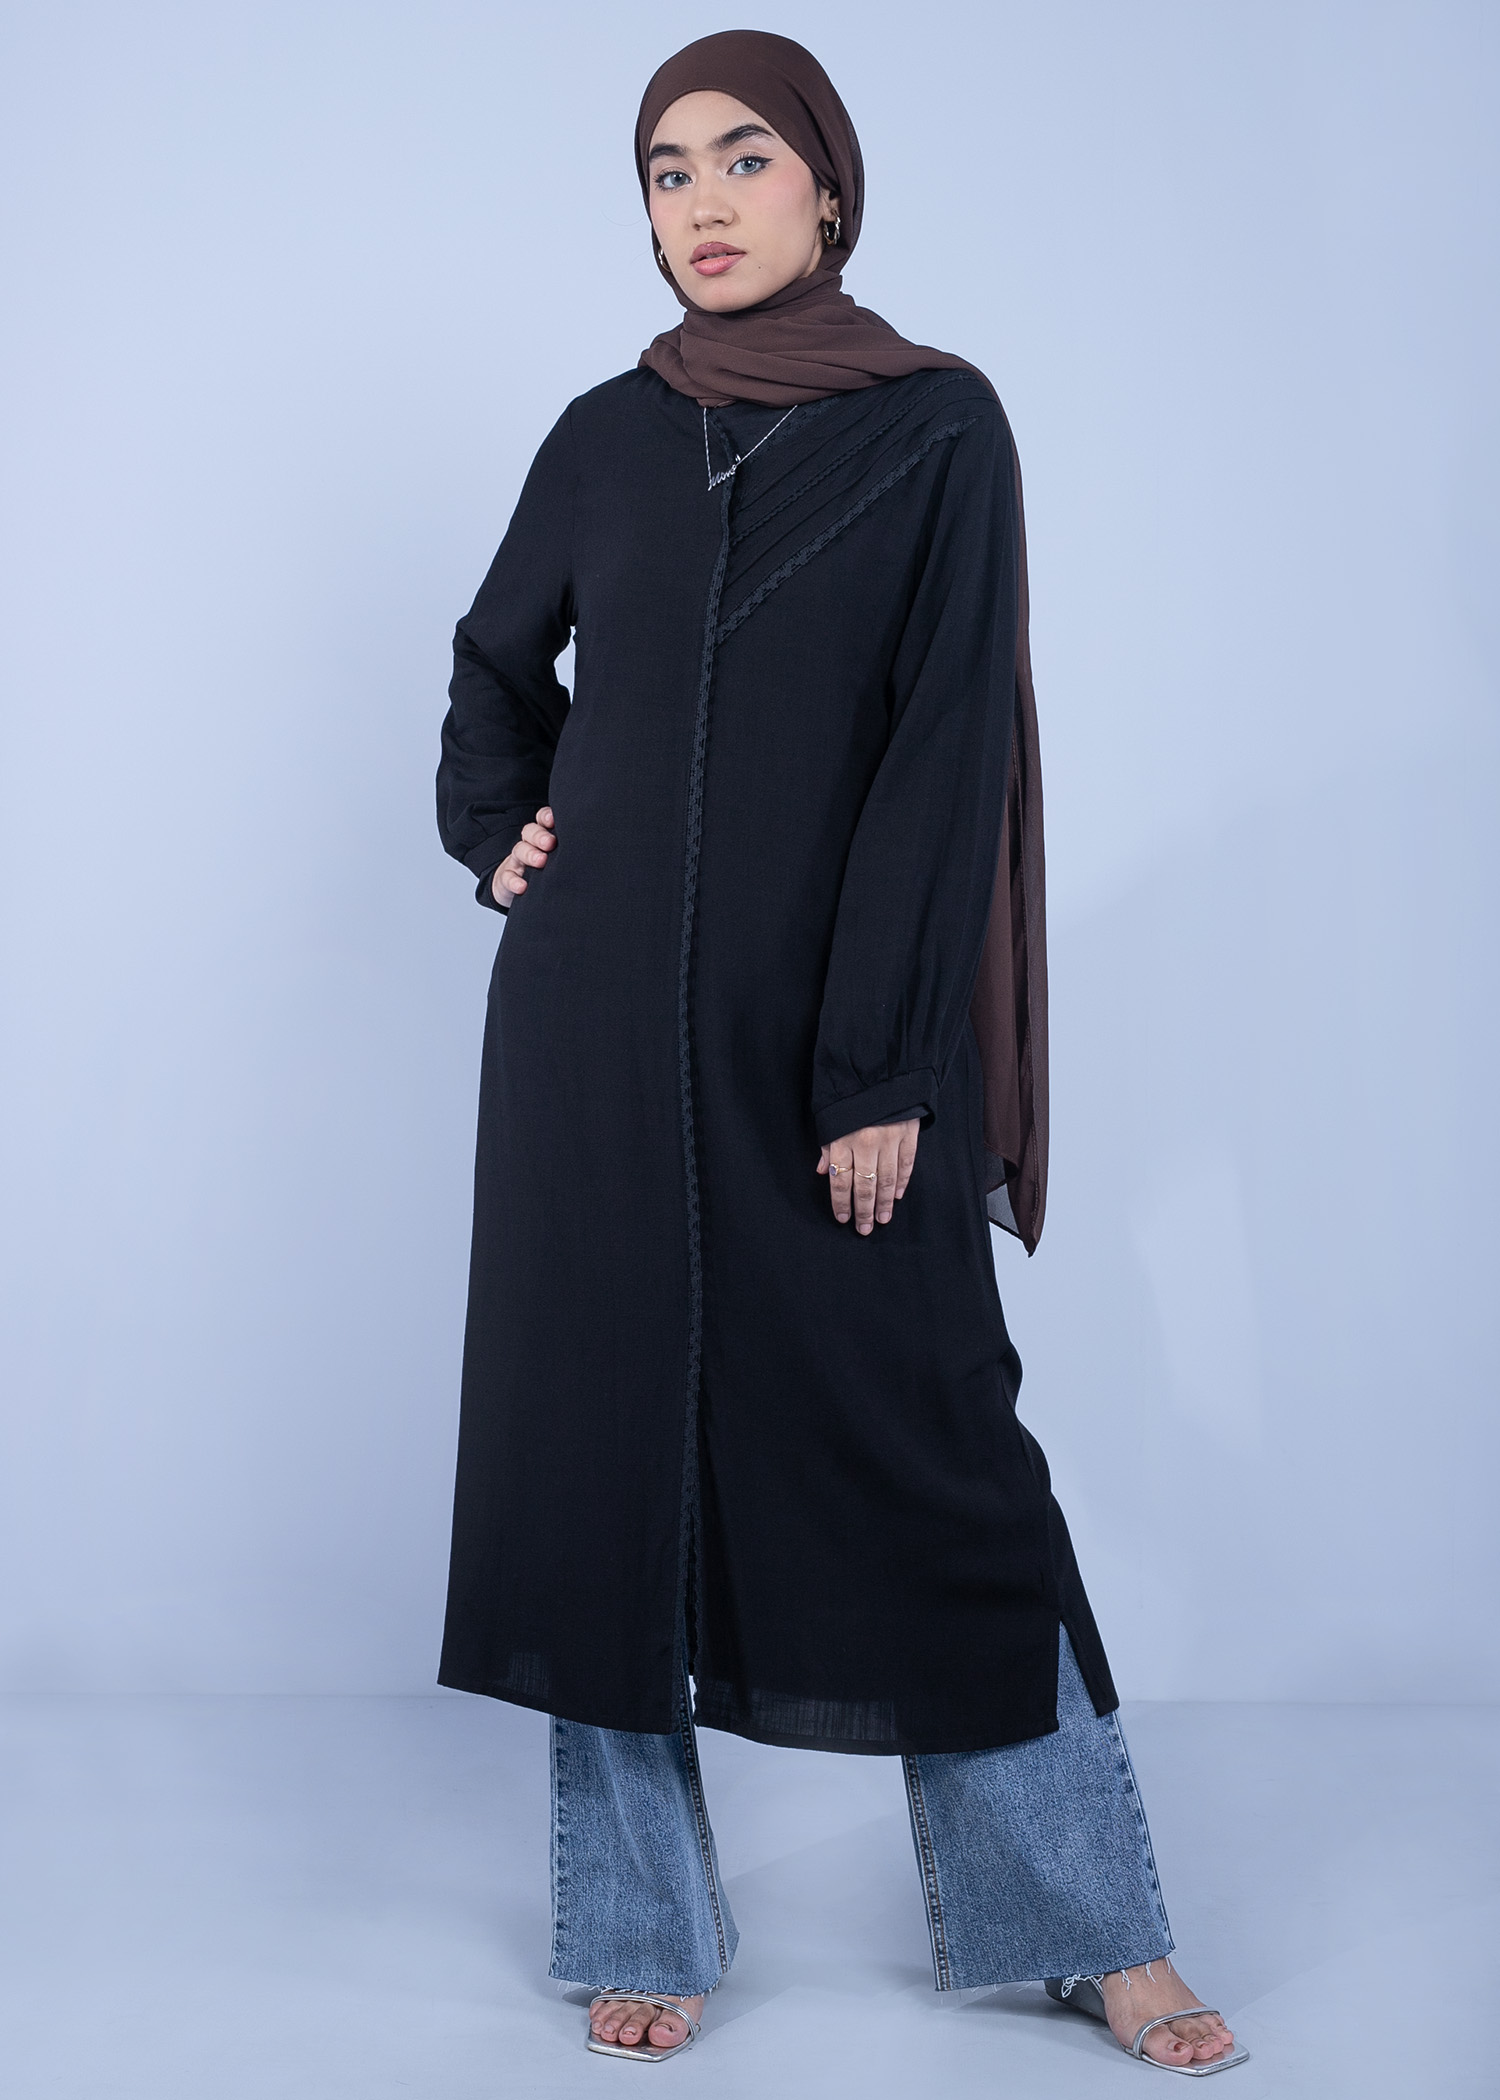 conical ladies long dress black color full front view